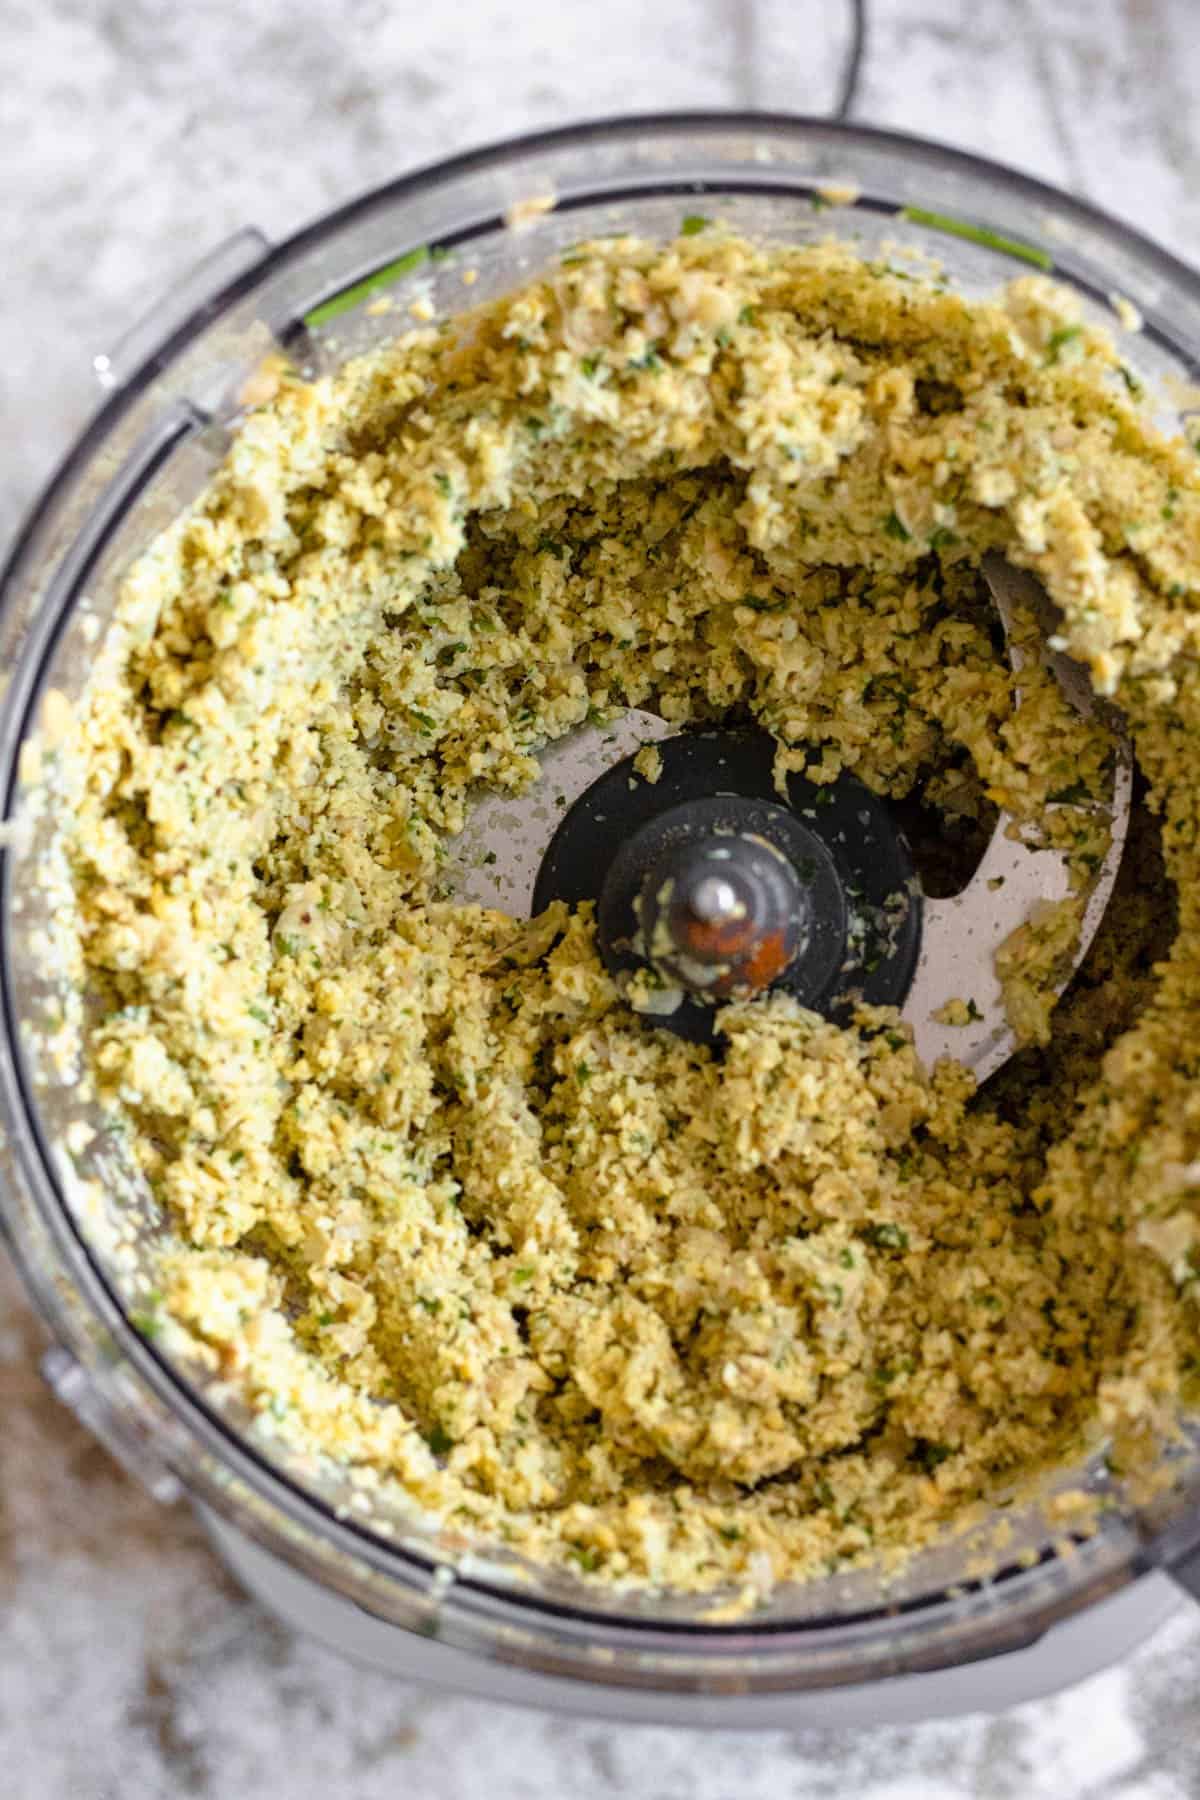 Chickpea mixture in the food processor. 